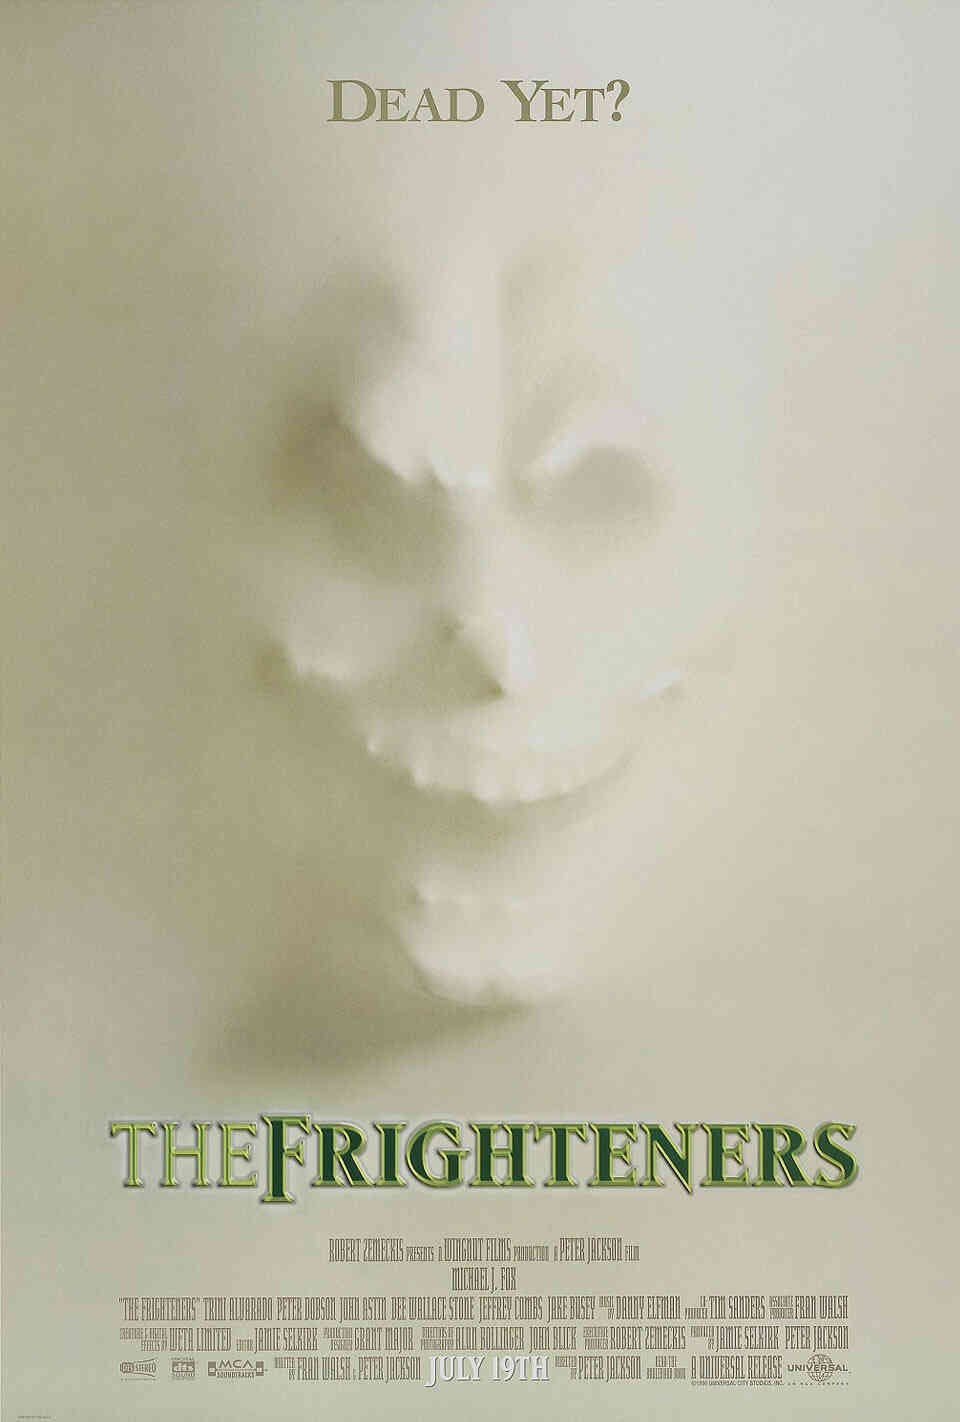 Read The Frighteners screenplay.